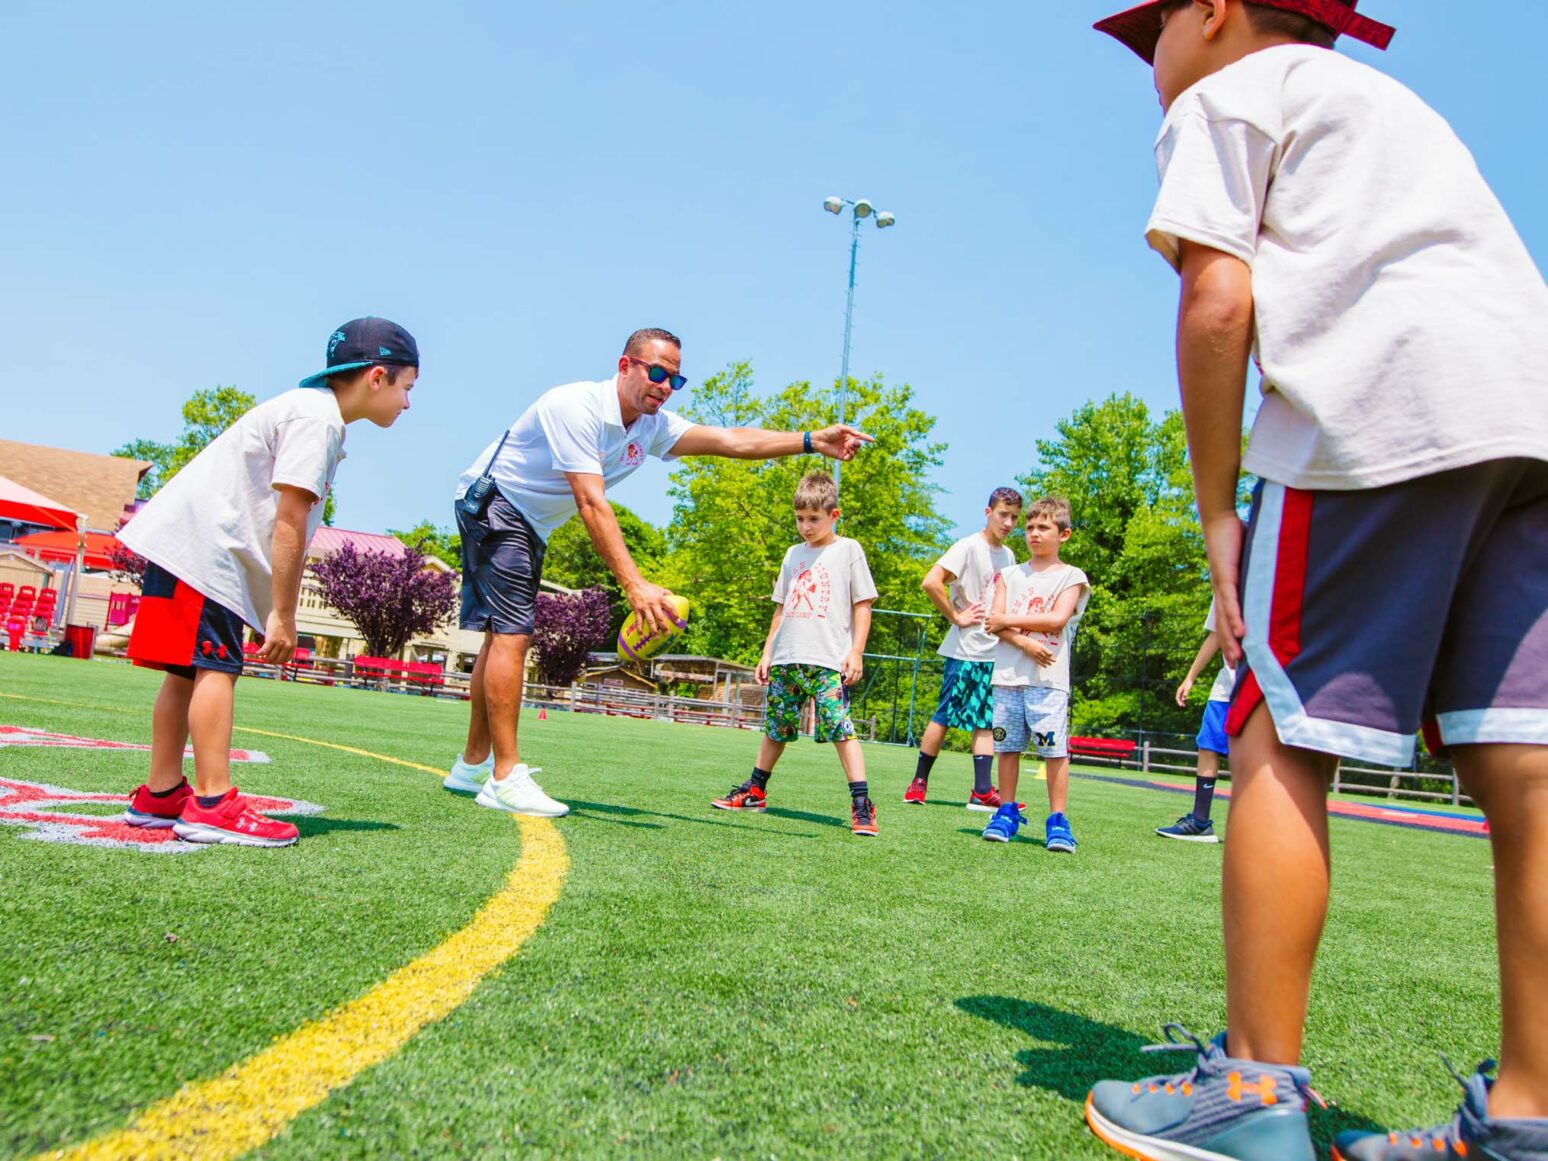 Football instructor teaching campers how to play football